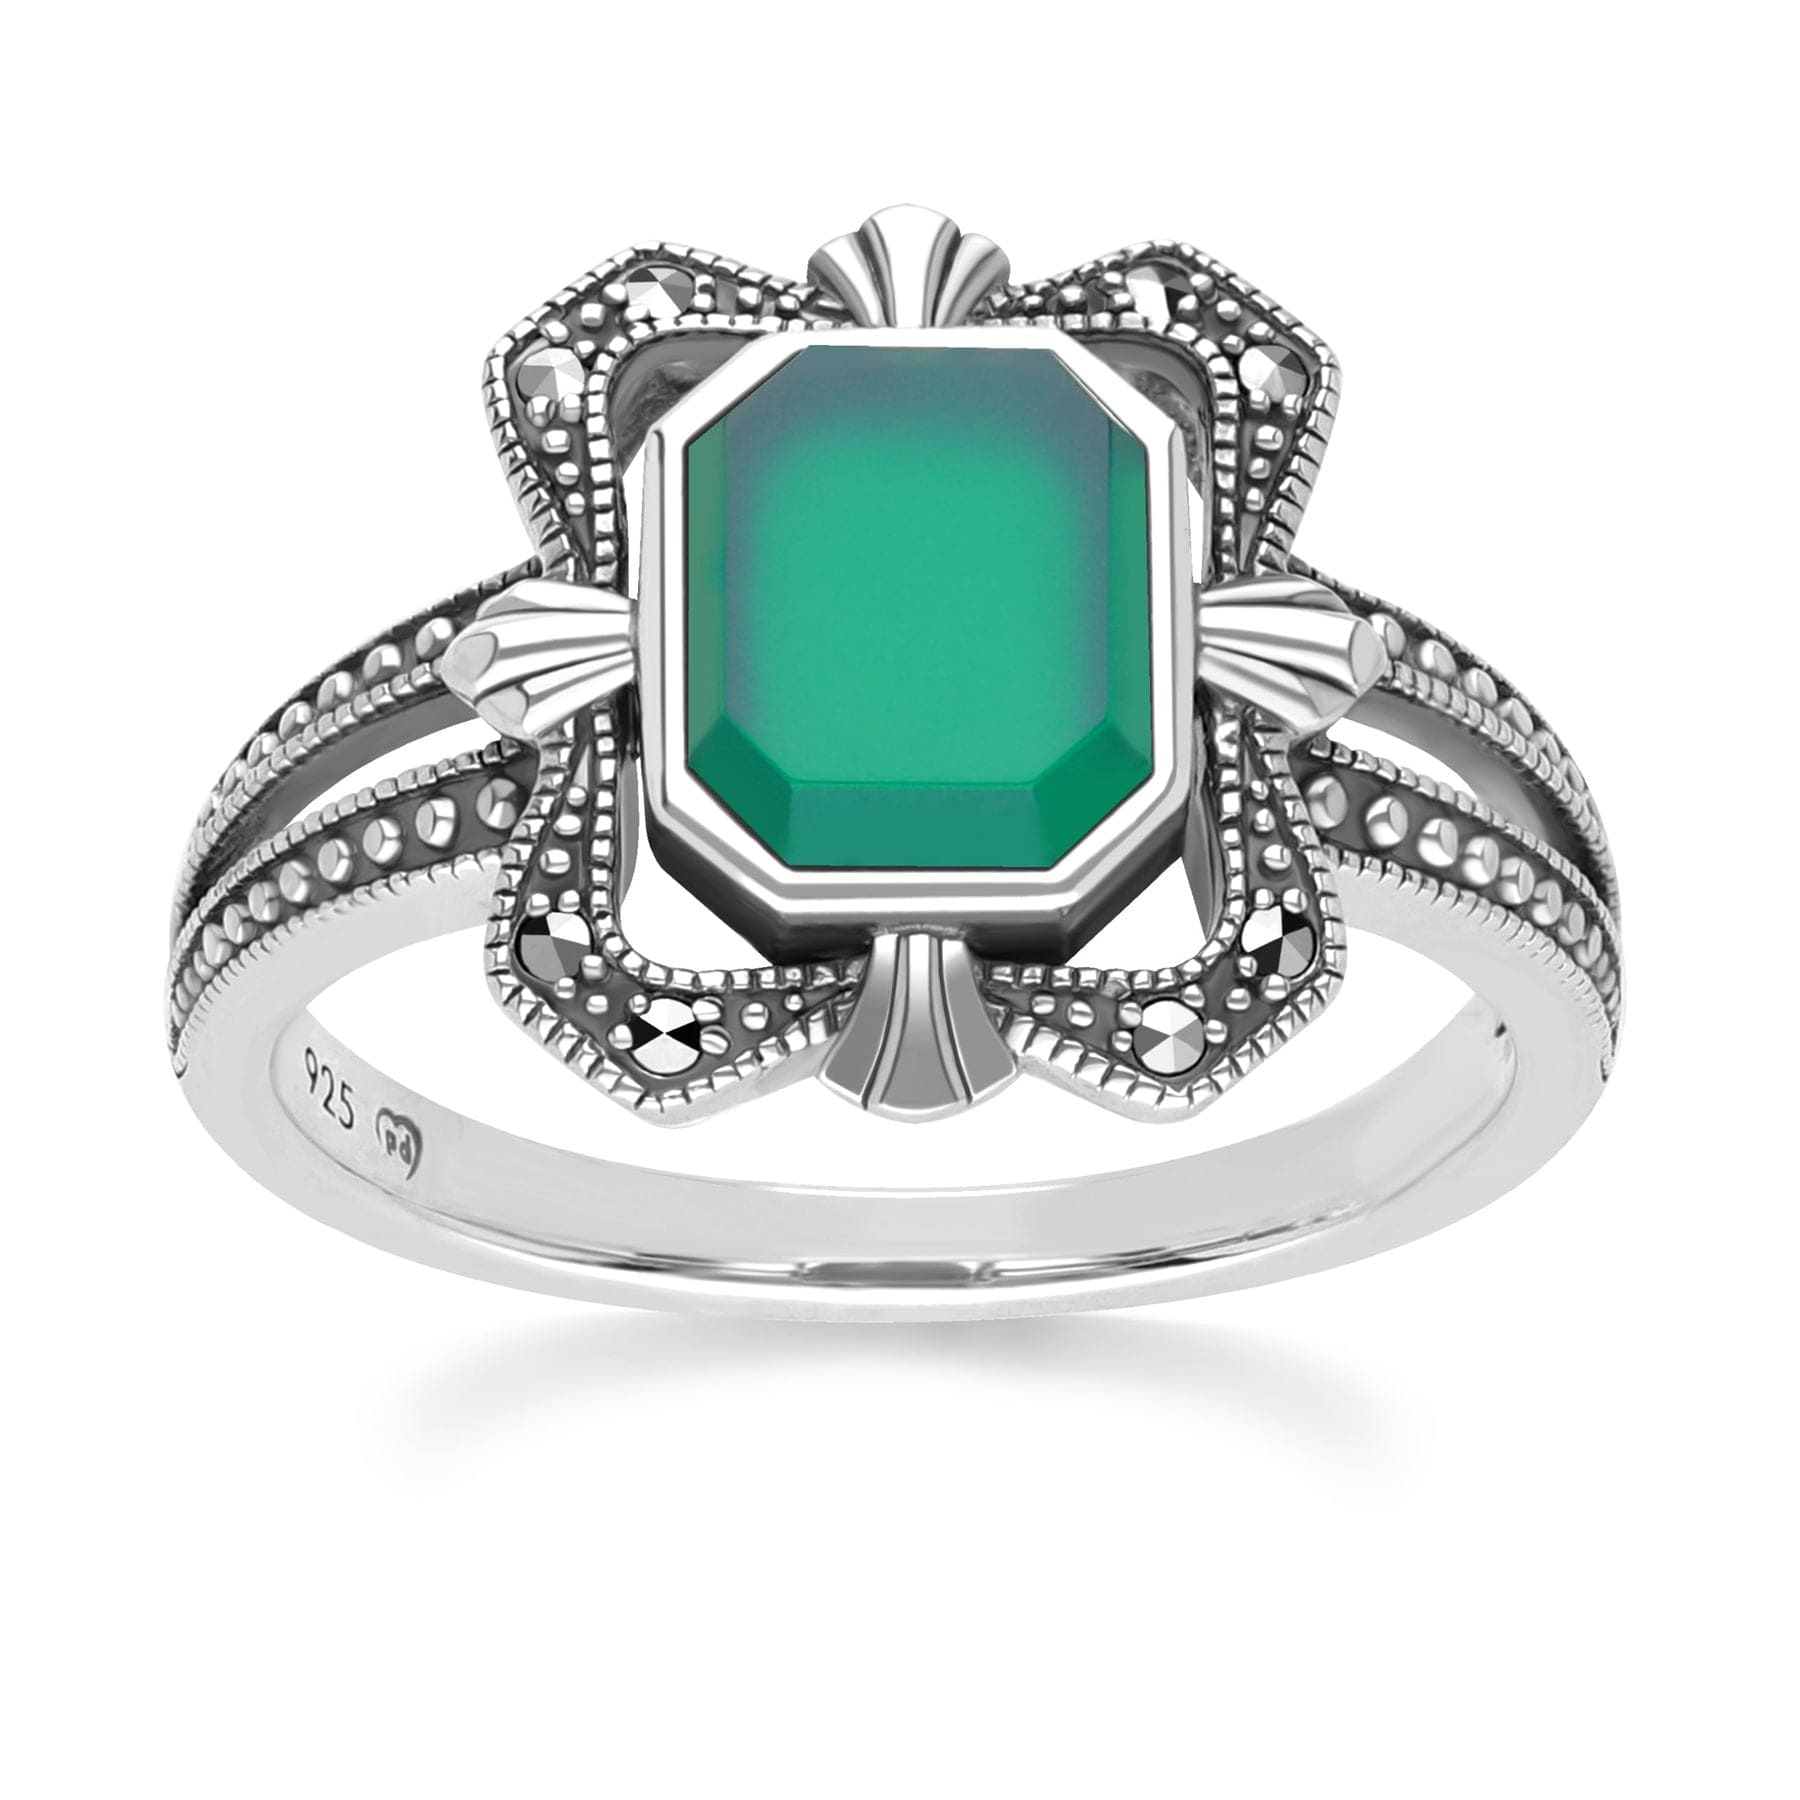 Art Deco Style Baguette Chalcedony and Marcasite Ring in Sterling Silver 214R642301925 